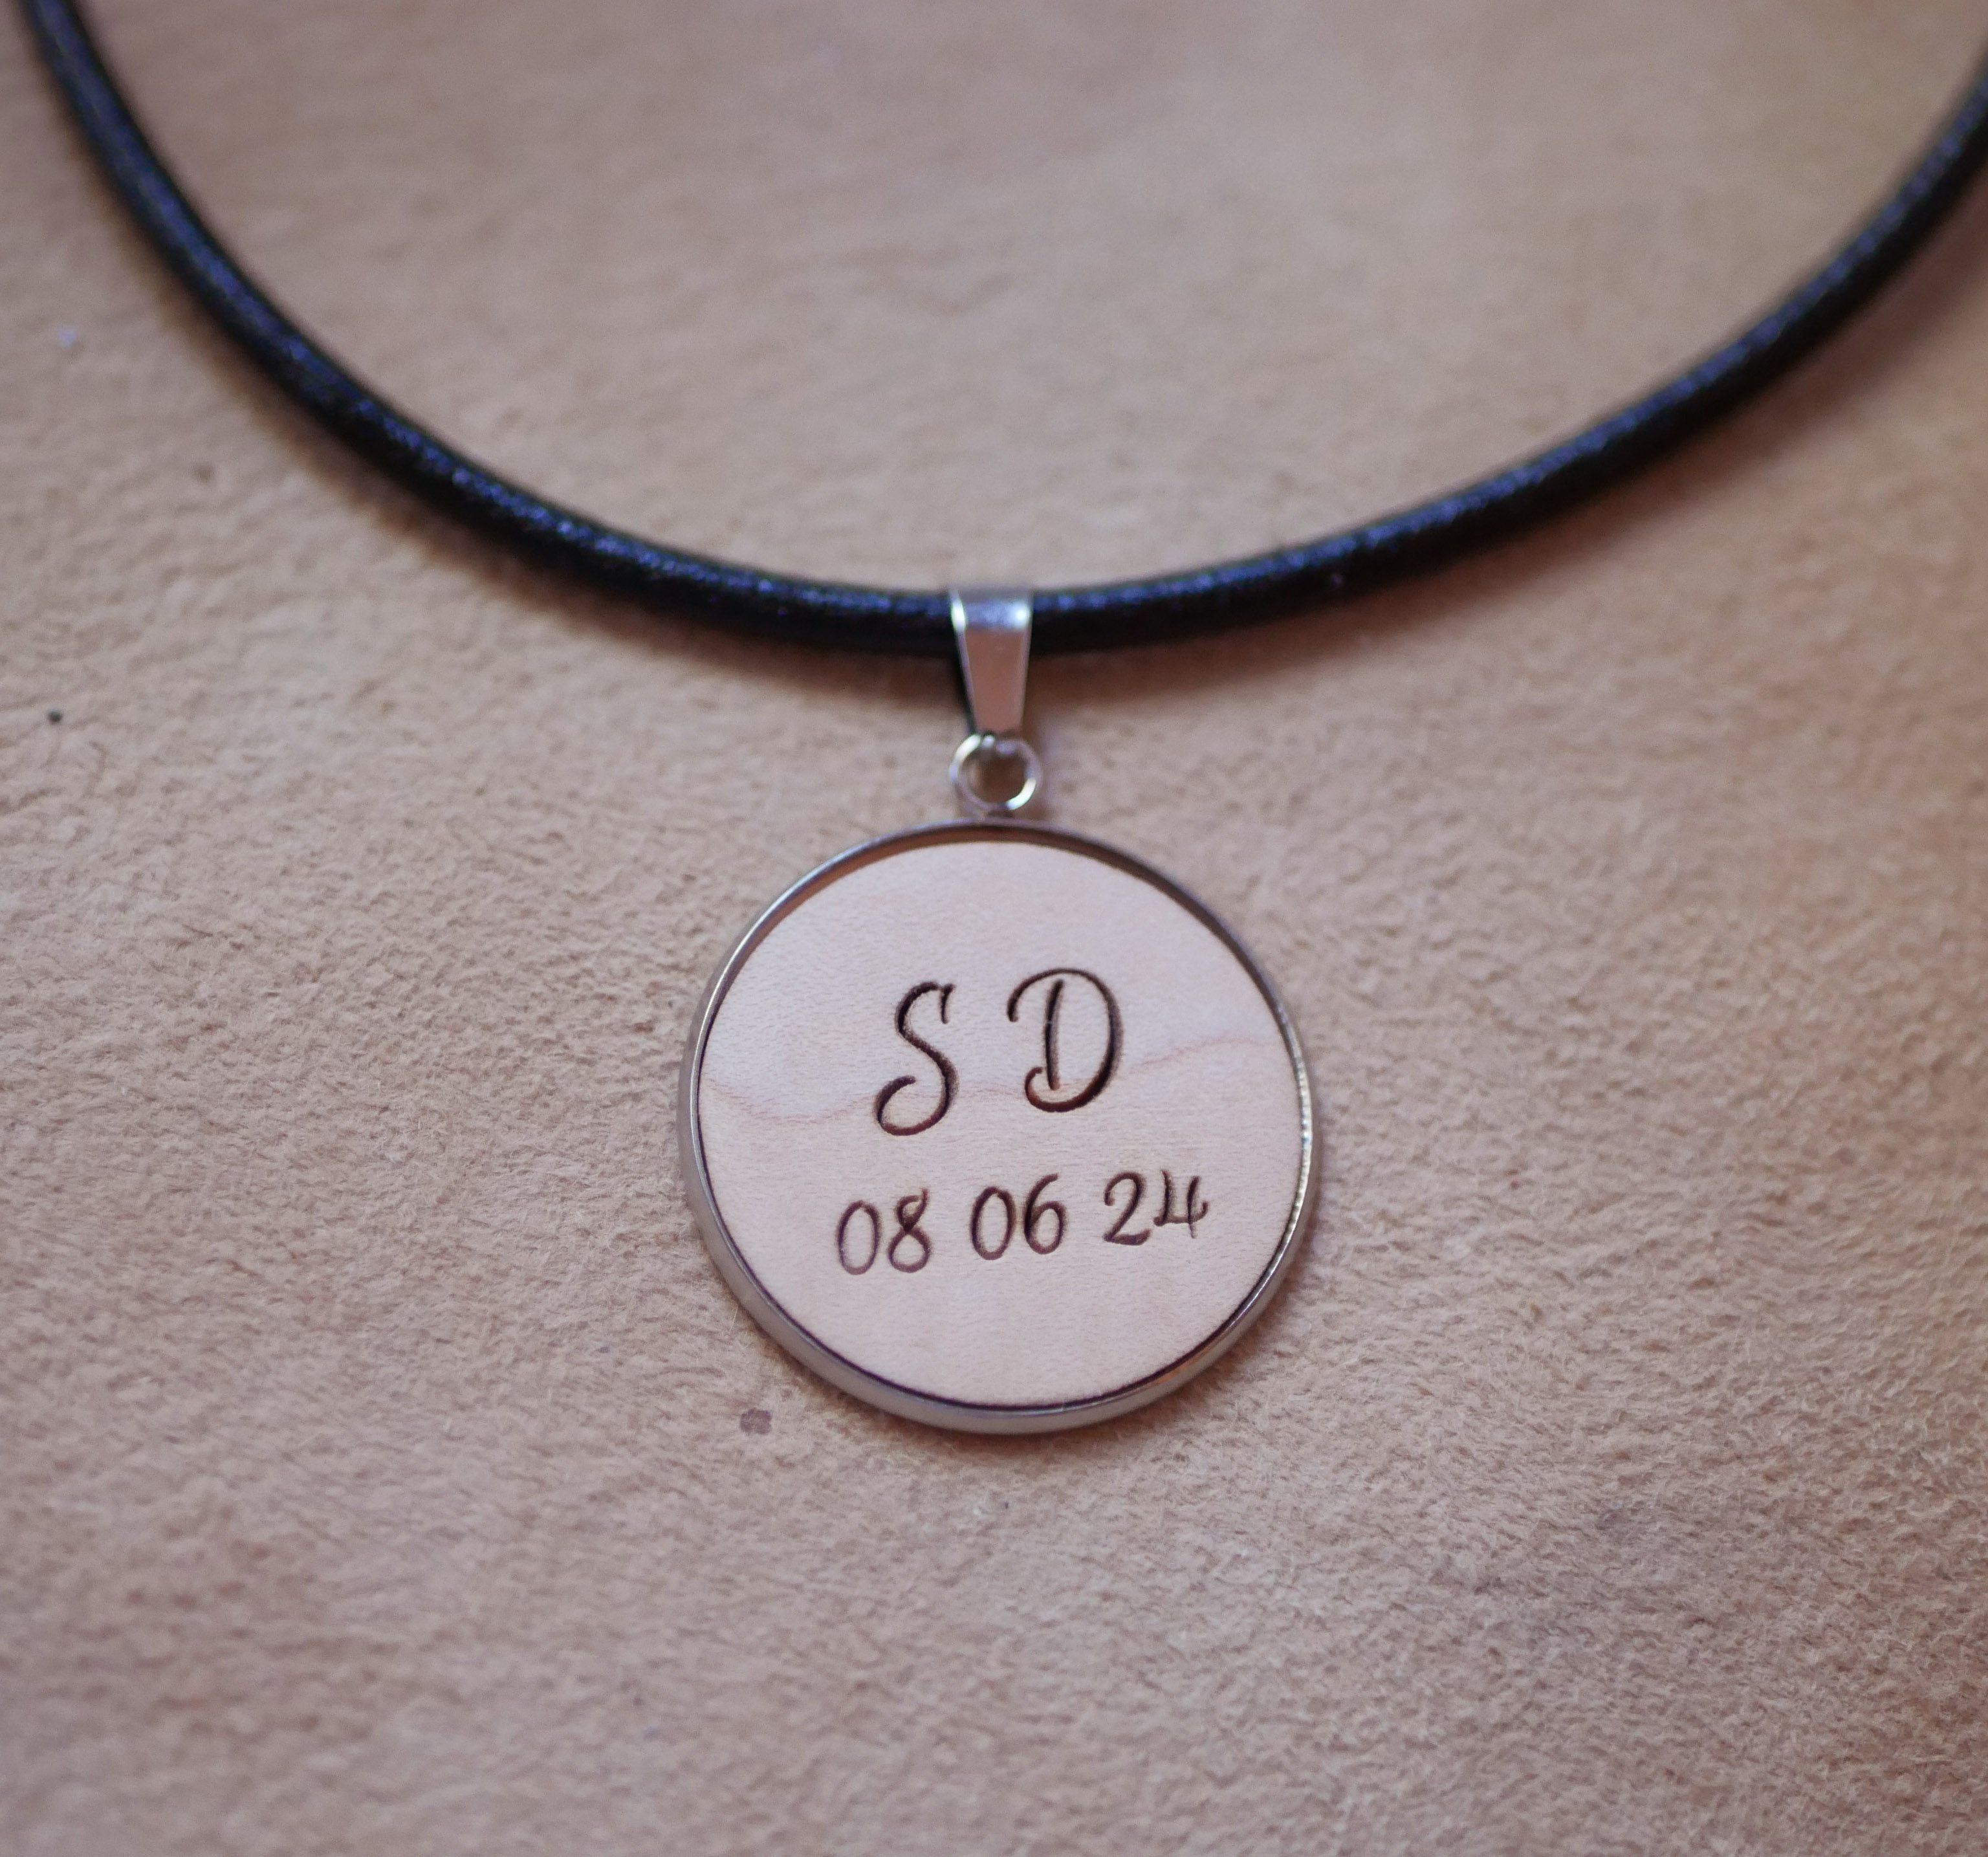 Engraved wooden medallion on European leather necklace to personalize 